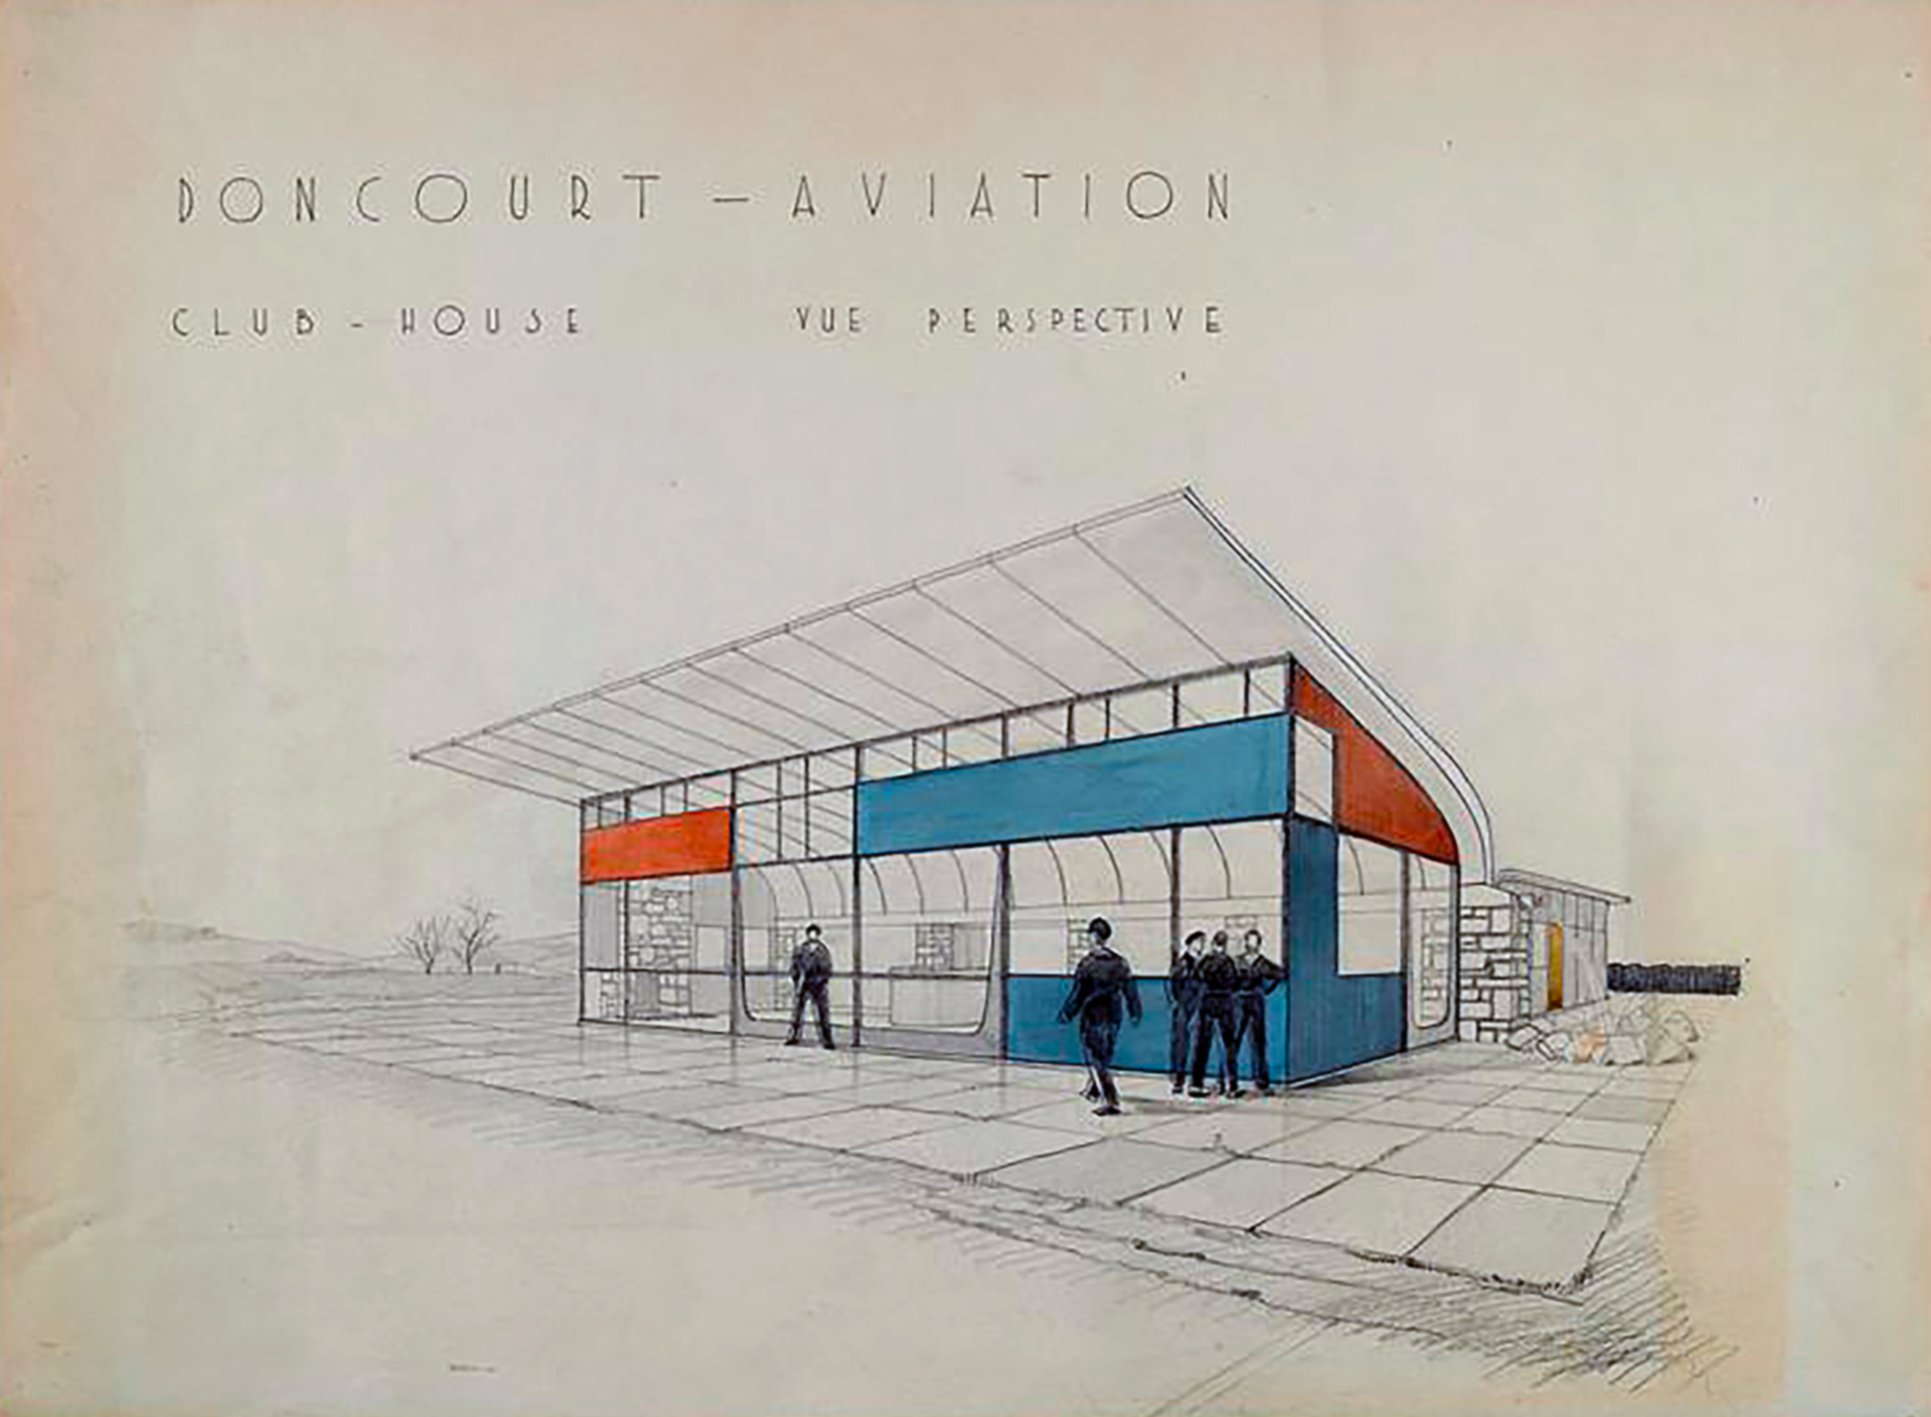 “Doncourt-Aviation, club-house. Perspective view”, ca. 1952.